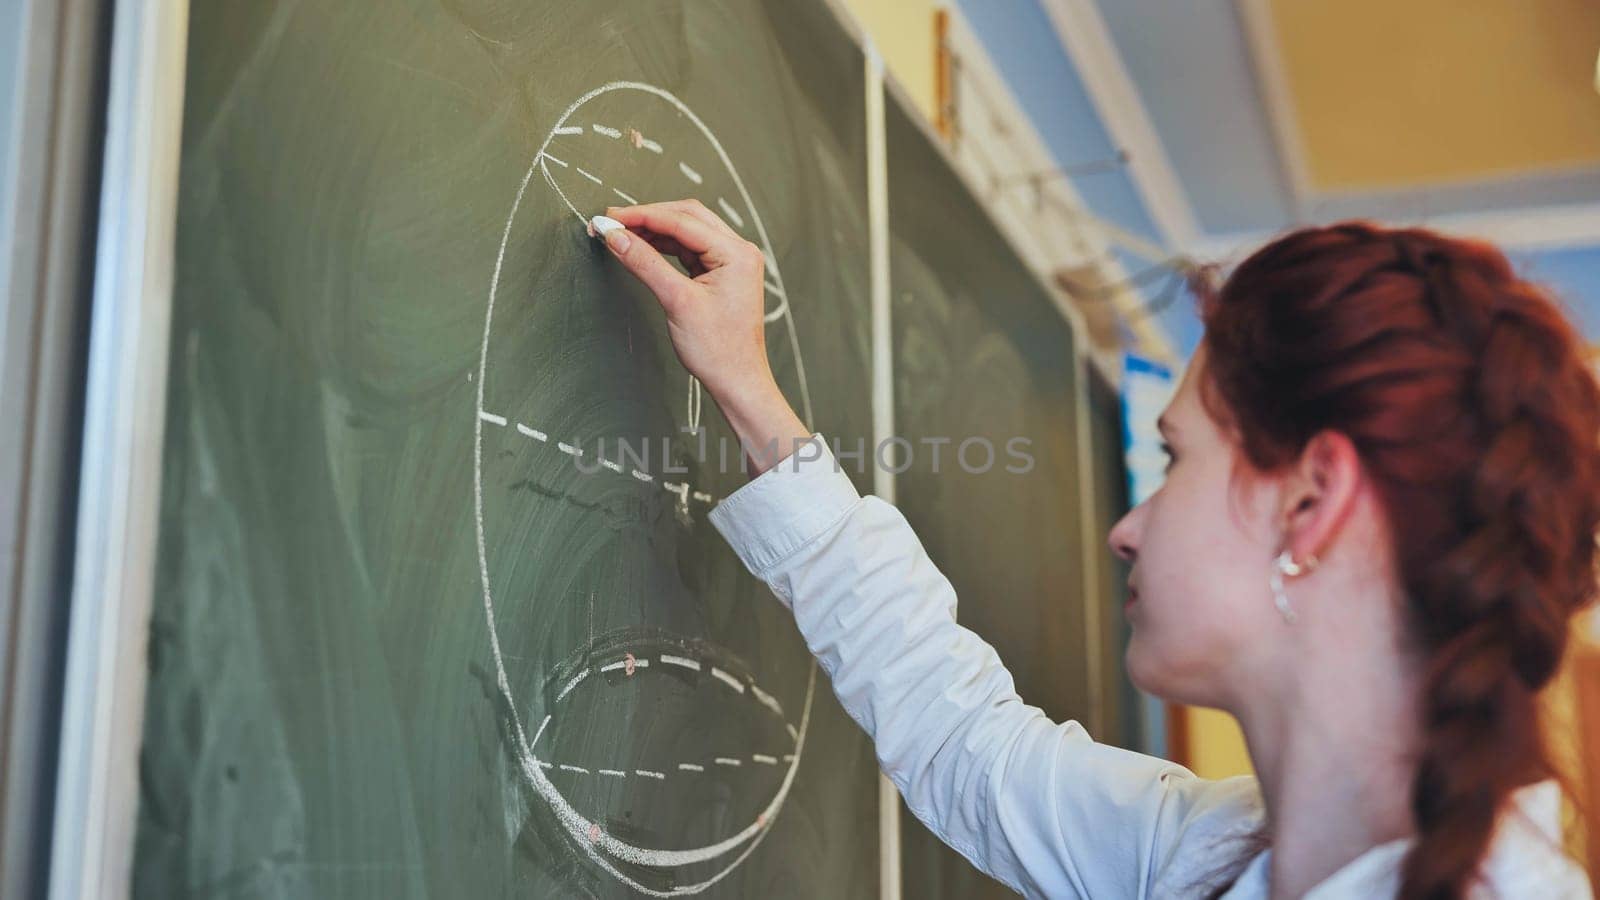 A red-haired schoolgirl draws geometric shapes on the blackboard. by DovidPro